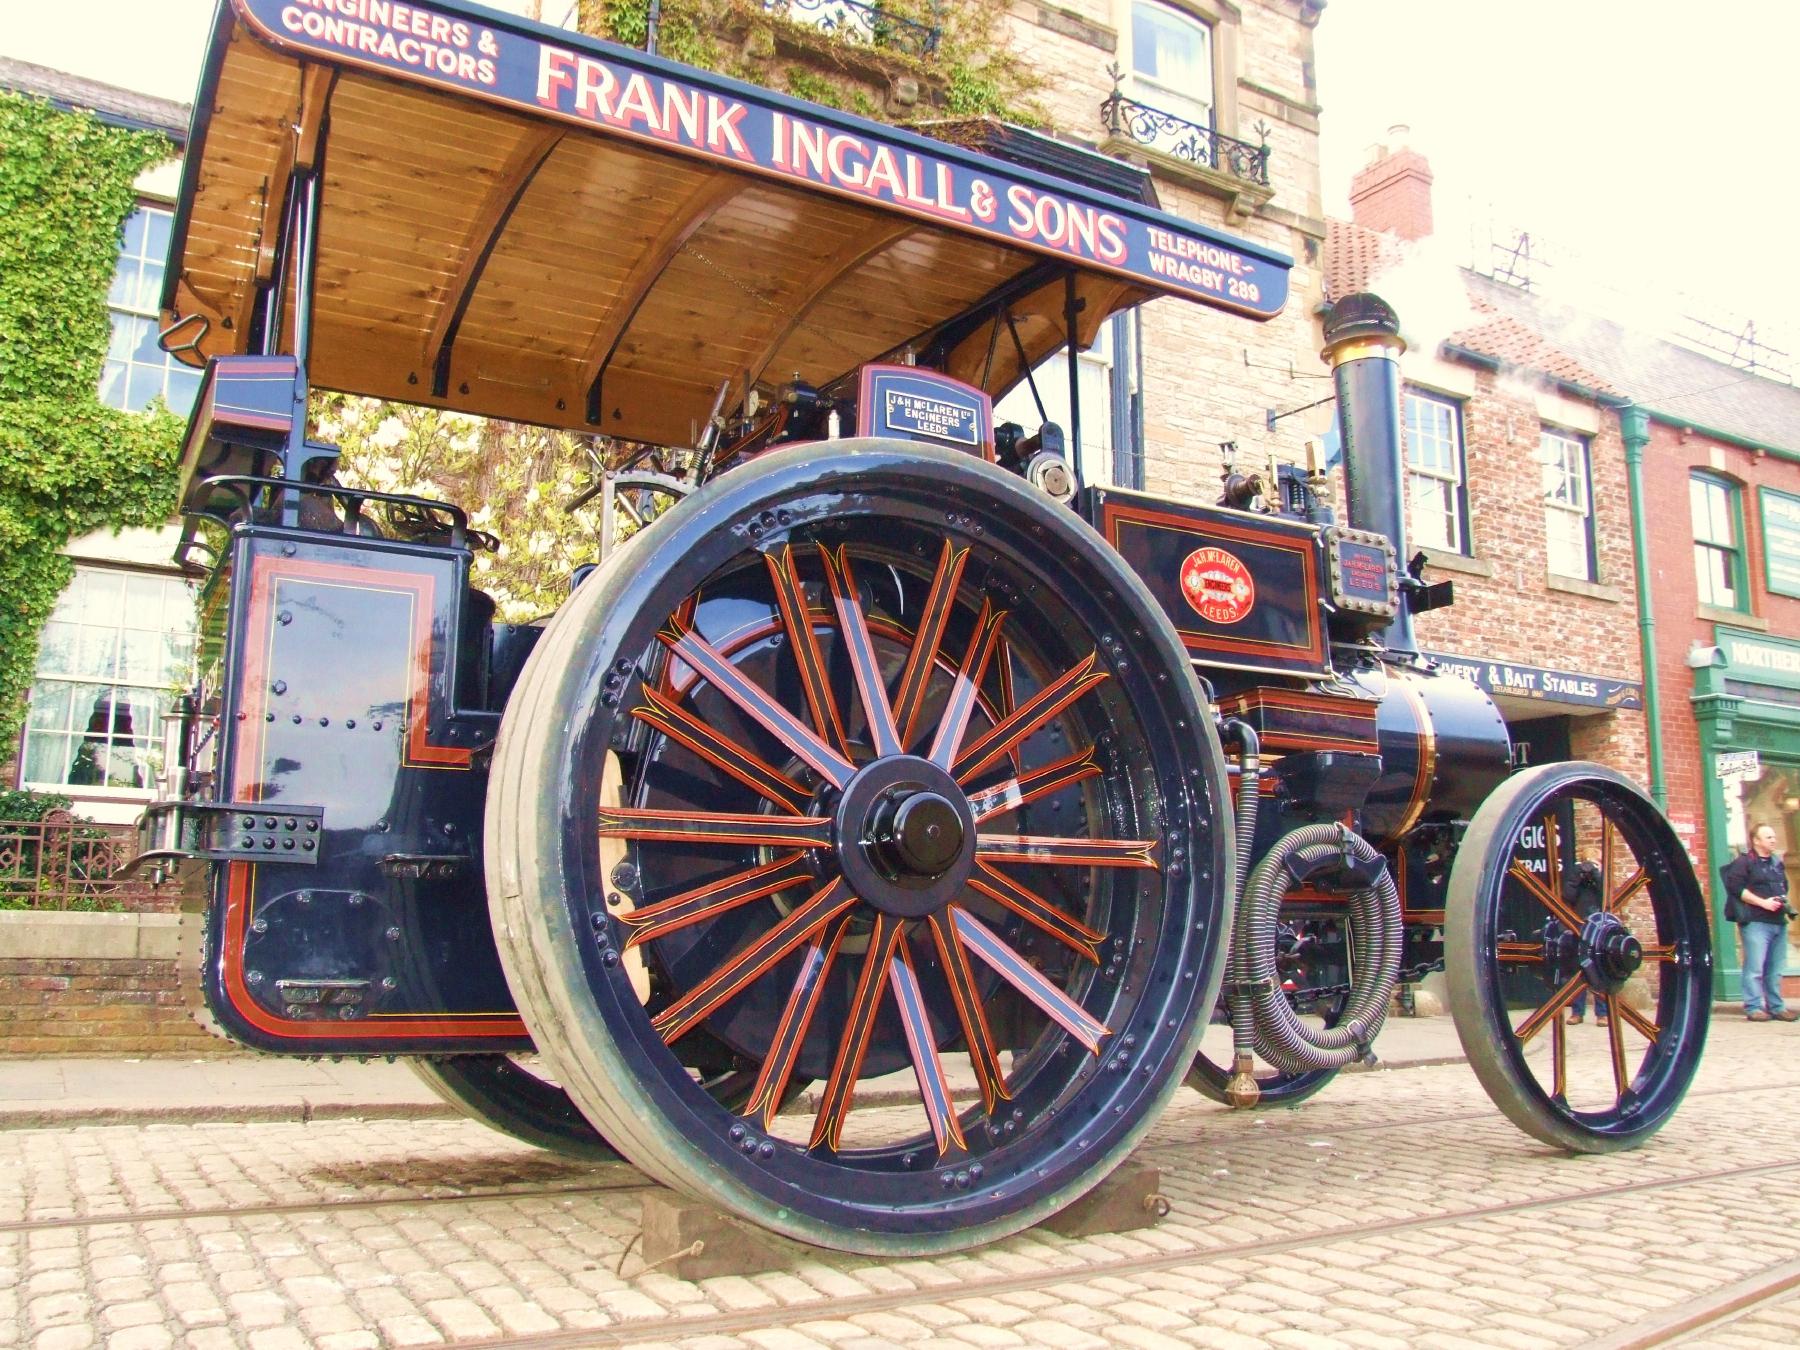 Tales of Victorian Steam, Georgian Entertainment and Beamish